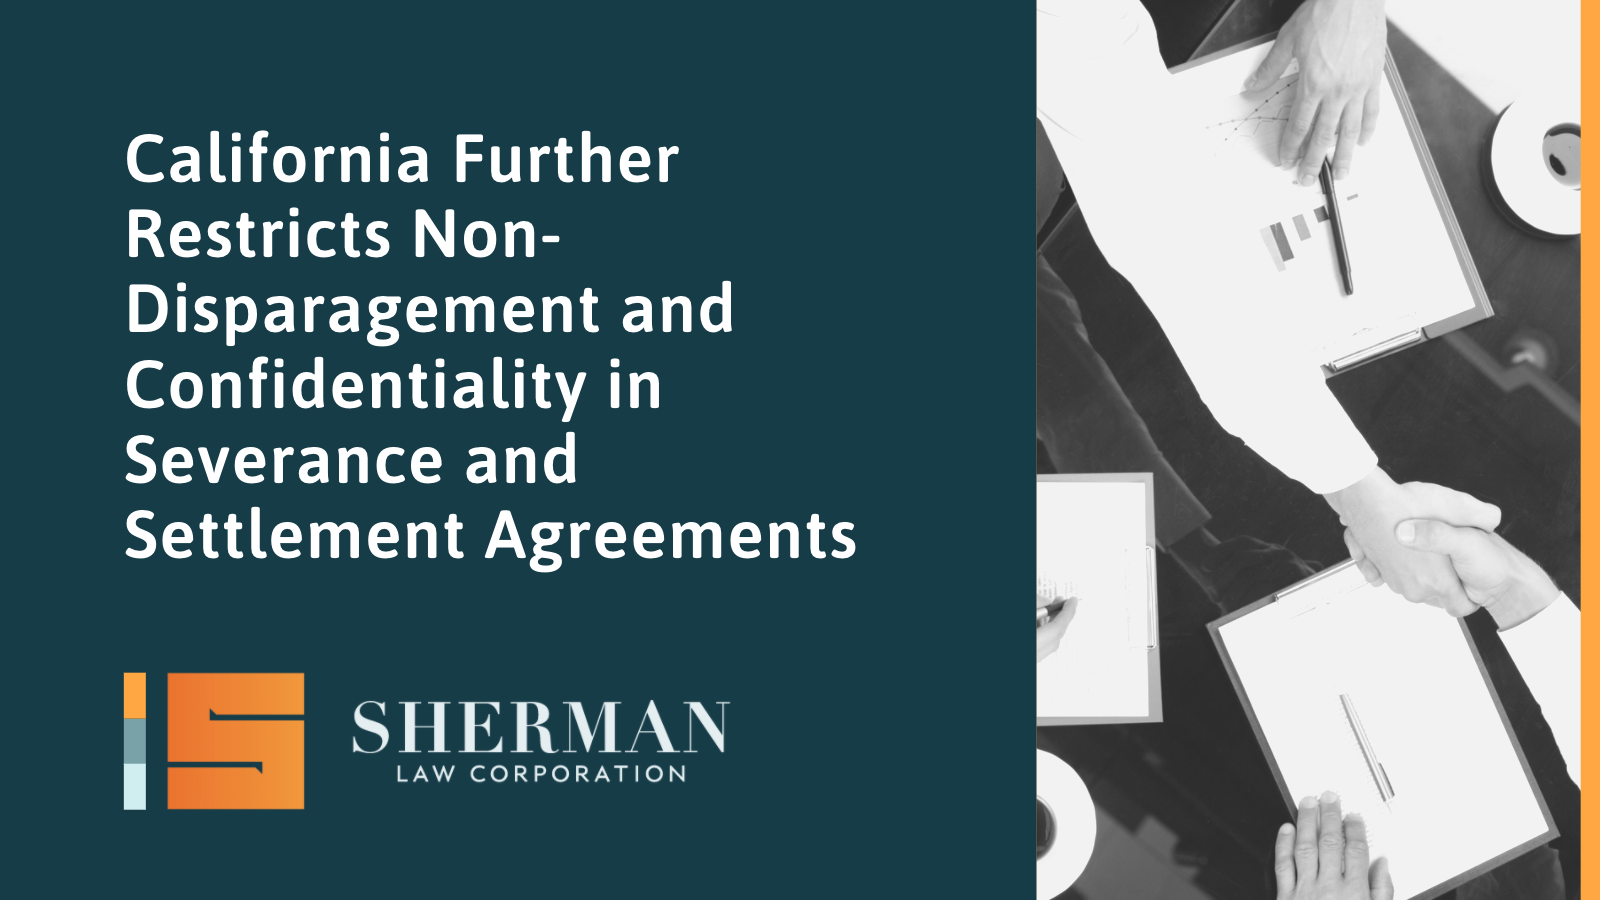 California Further Restricts Non-Disparagement and Confidentiality in Severance and Settlement Agreements - sherman law corporation